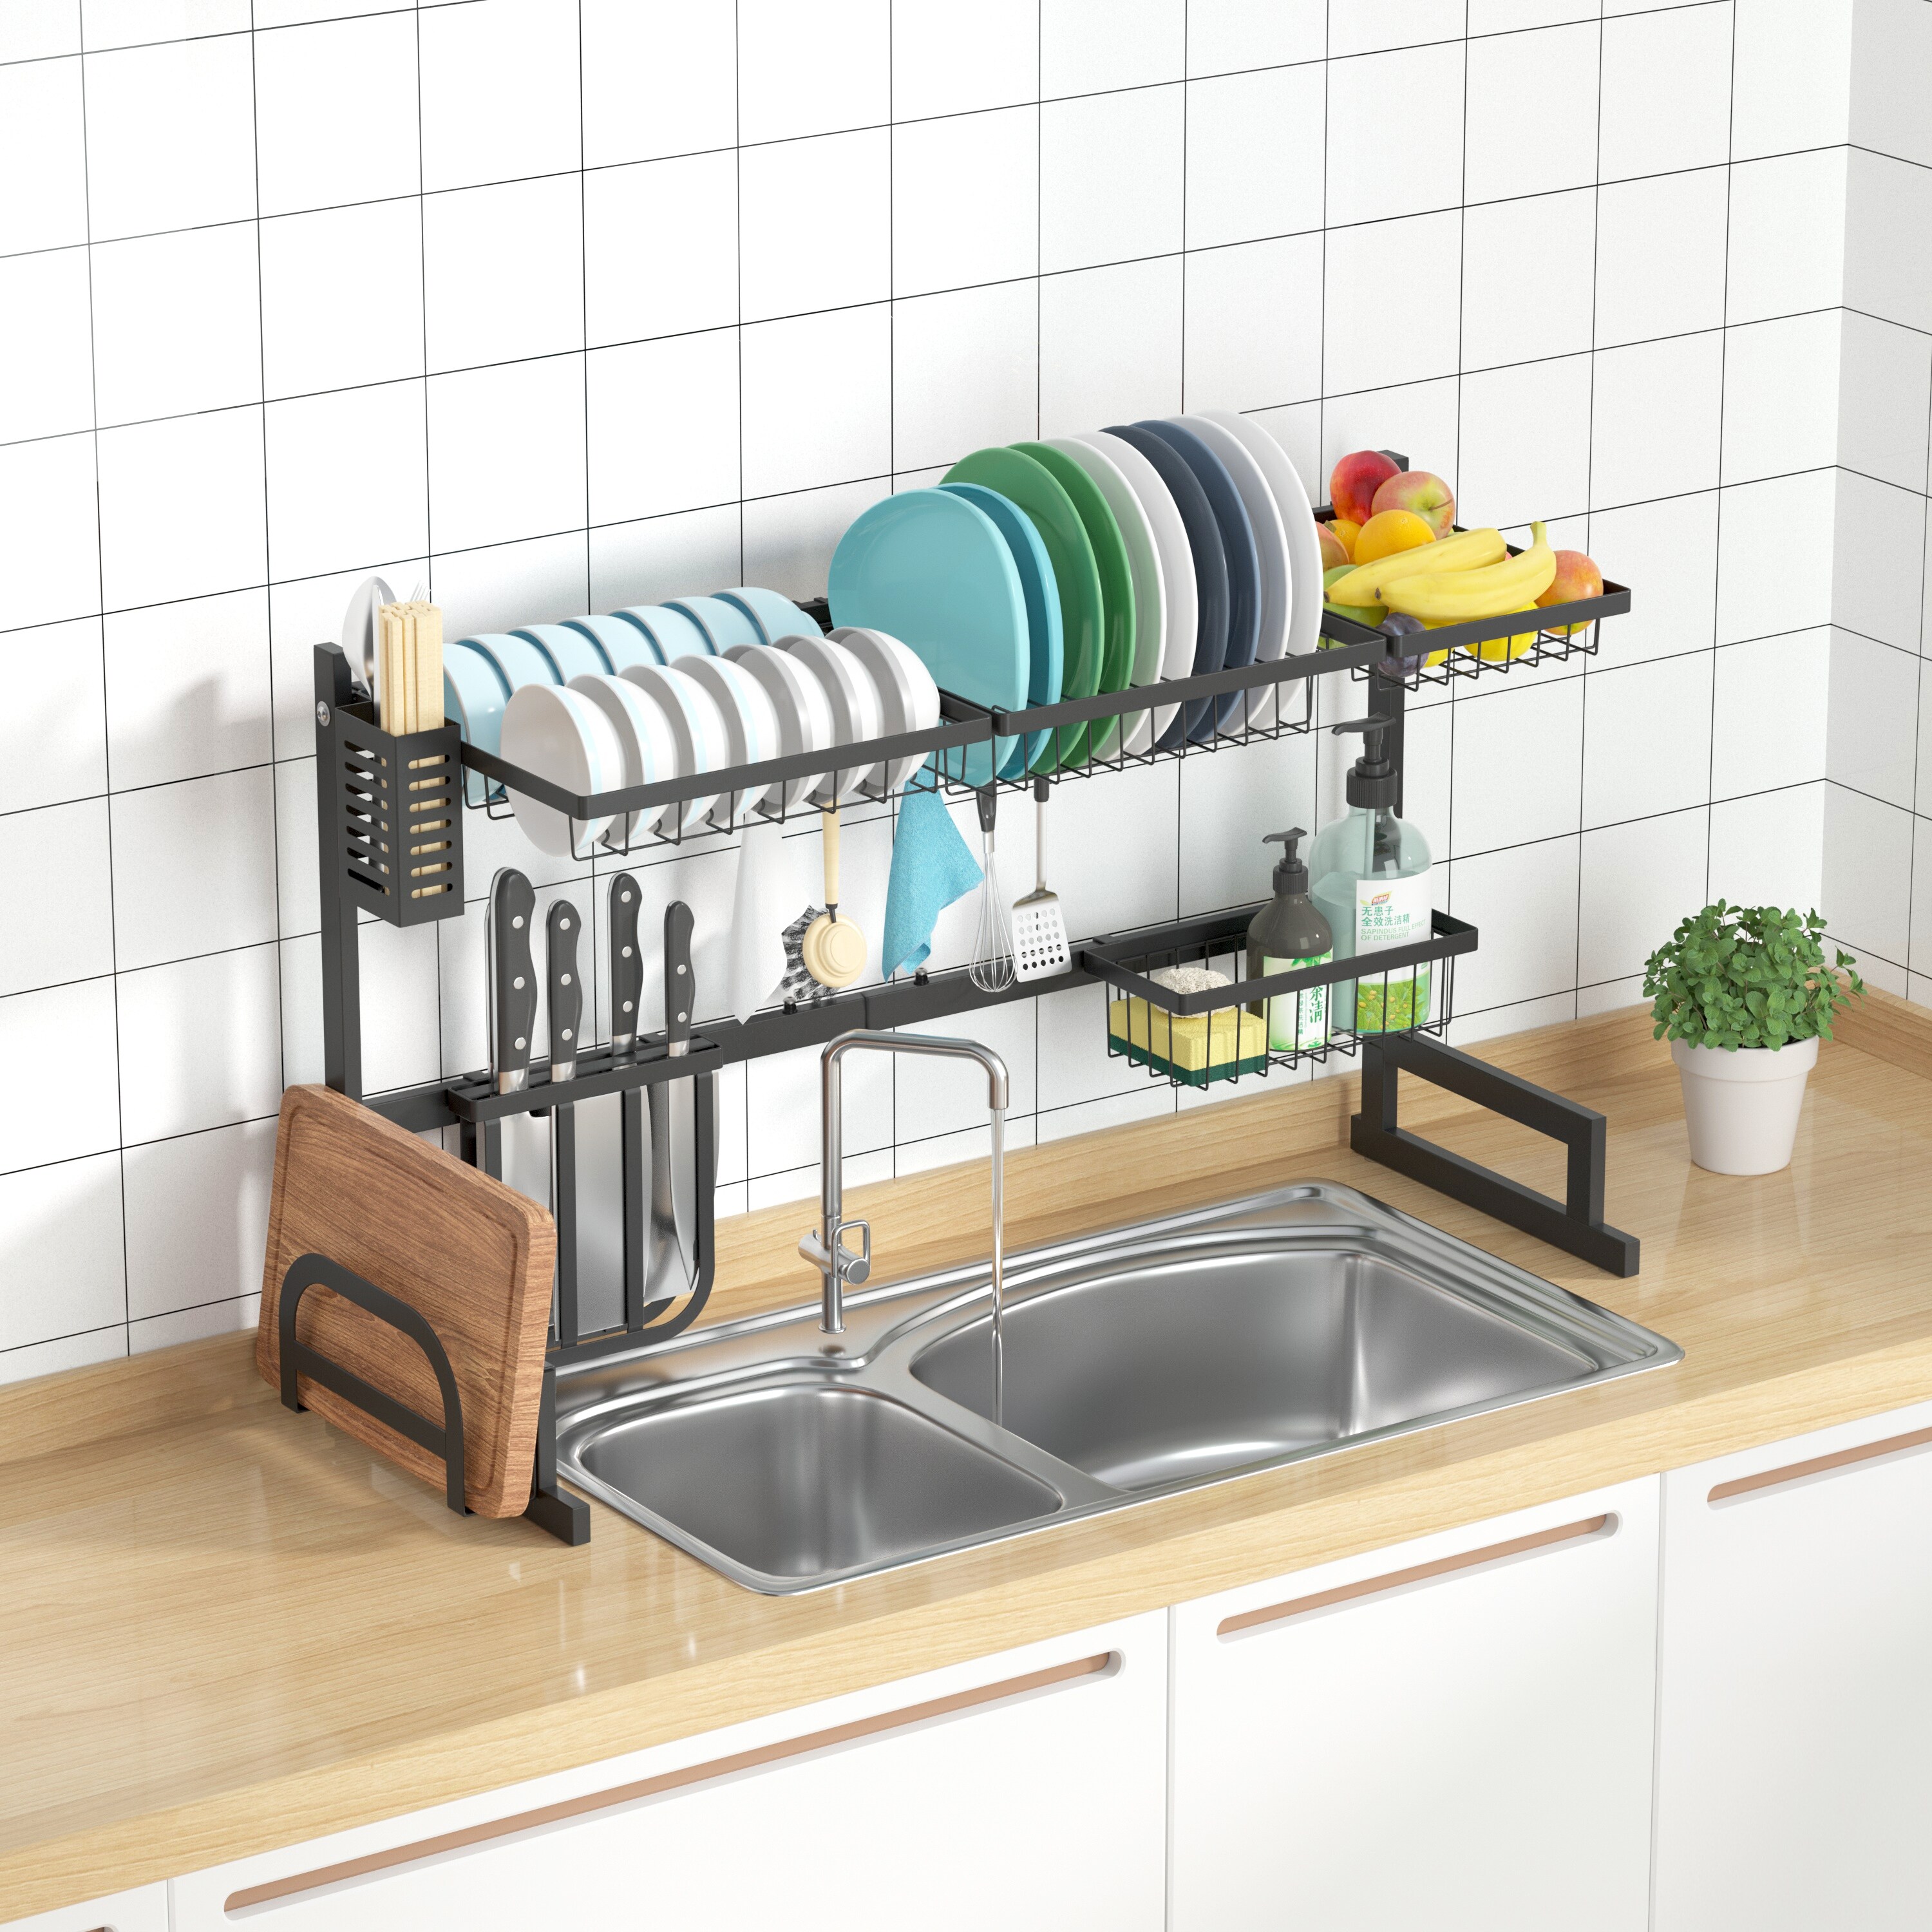 https://ak1.ostkcdn.com/images/products/is/images/direct/f7e5ff419c925a0f05d7d64f1a8abbc04d57b5af/Adjustable-Large-Dish-Drying-Rack-Metal-Over-the-Sink-Storage-Kitchen.jpg